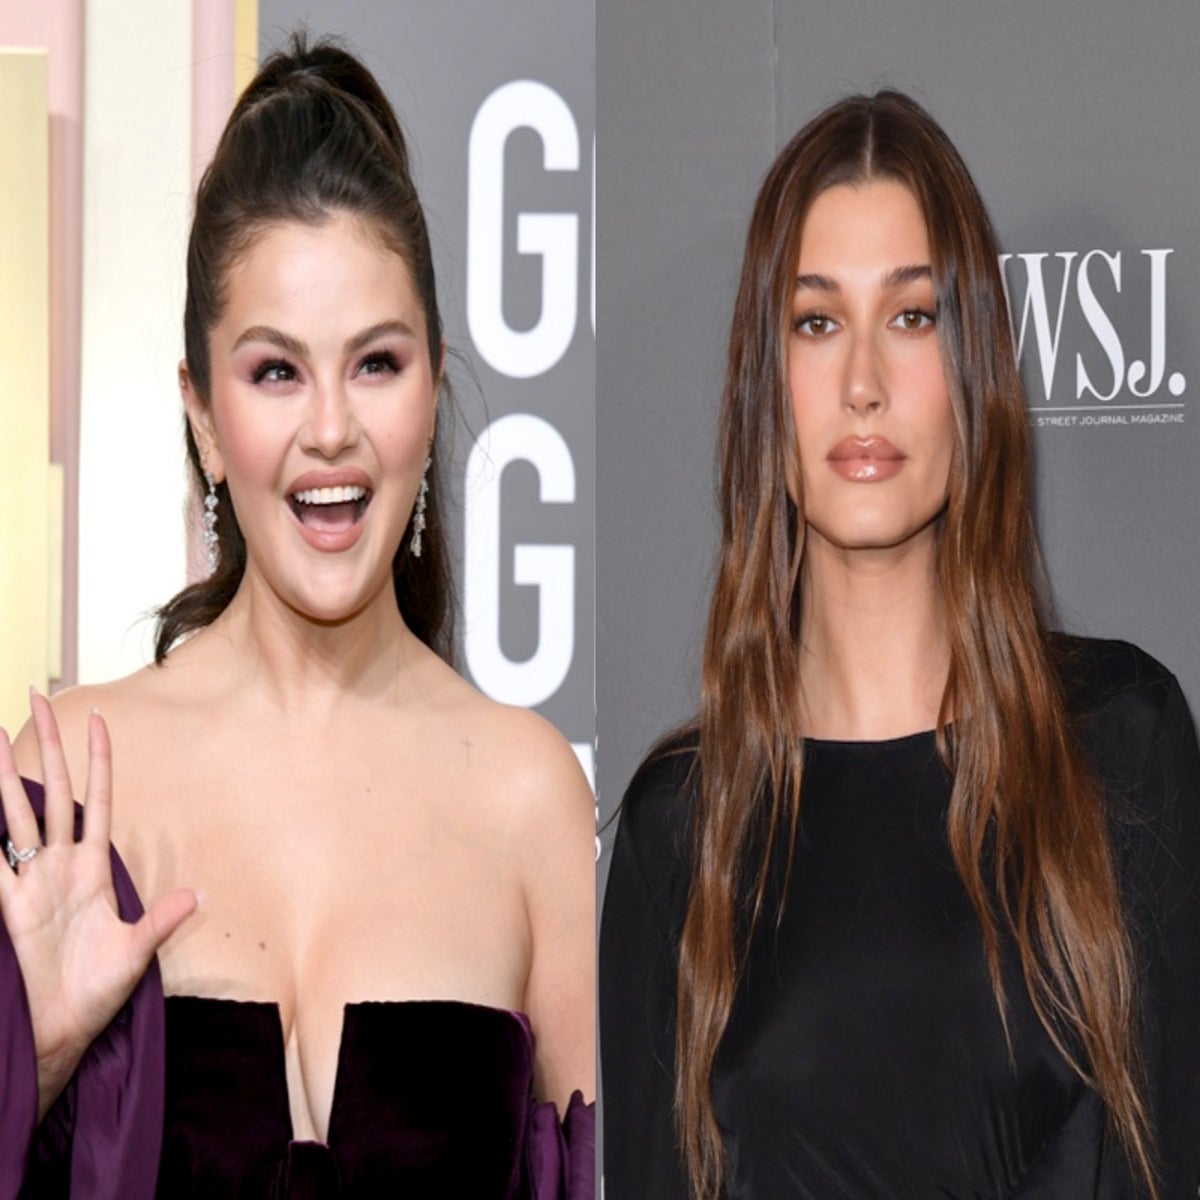 Sellena Bella Free Sex Videos - Selena Gomez pleads with fans to 'consider others' mental health' amid  Hailey Bieber 'feud' | The Independent